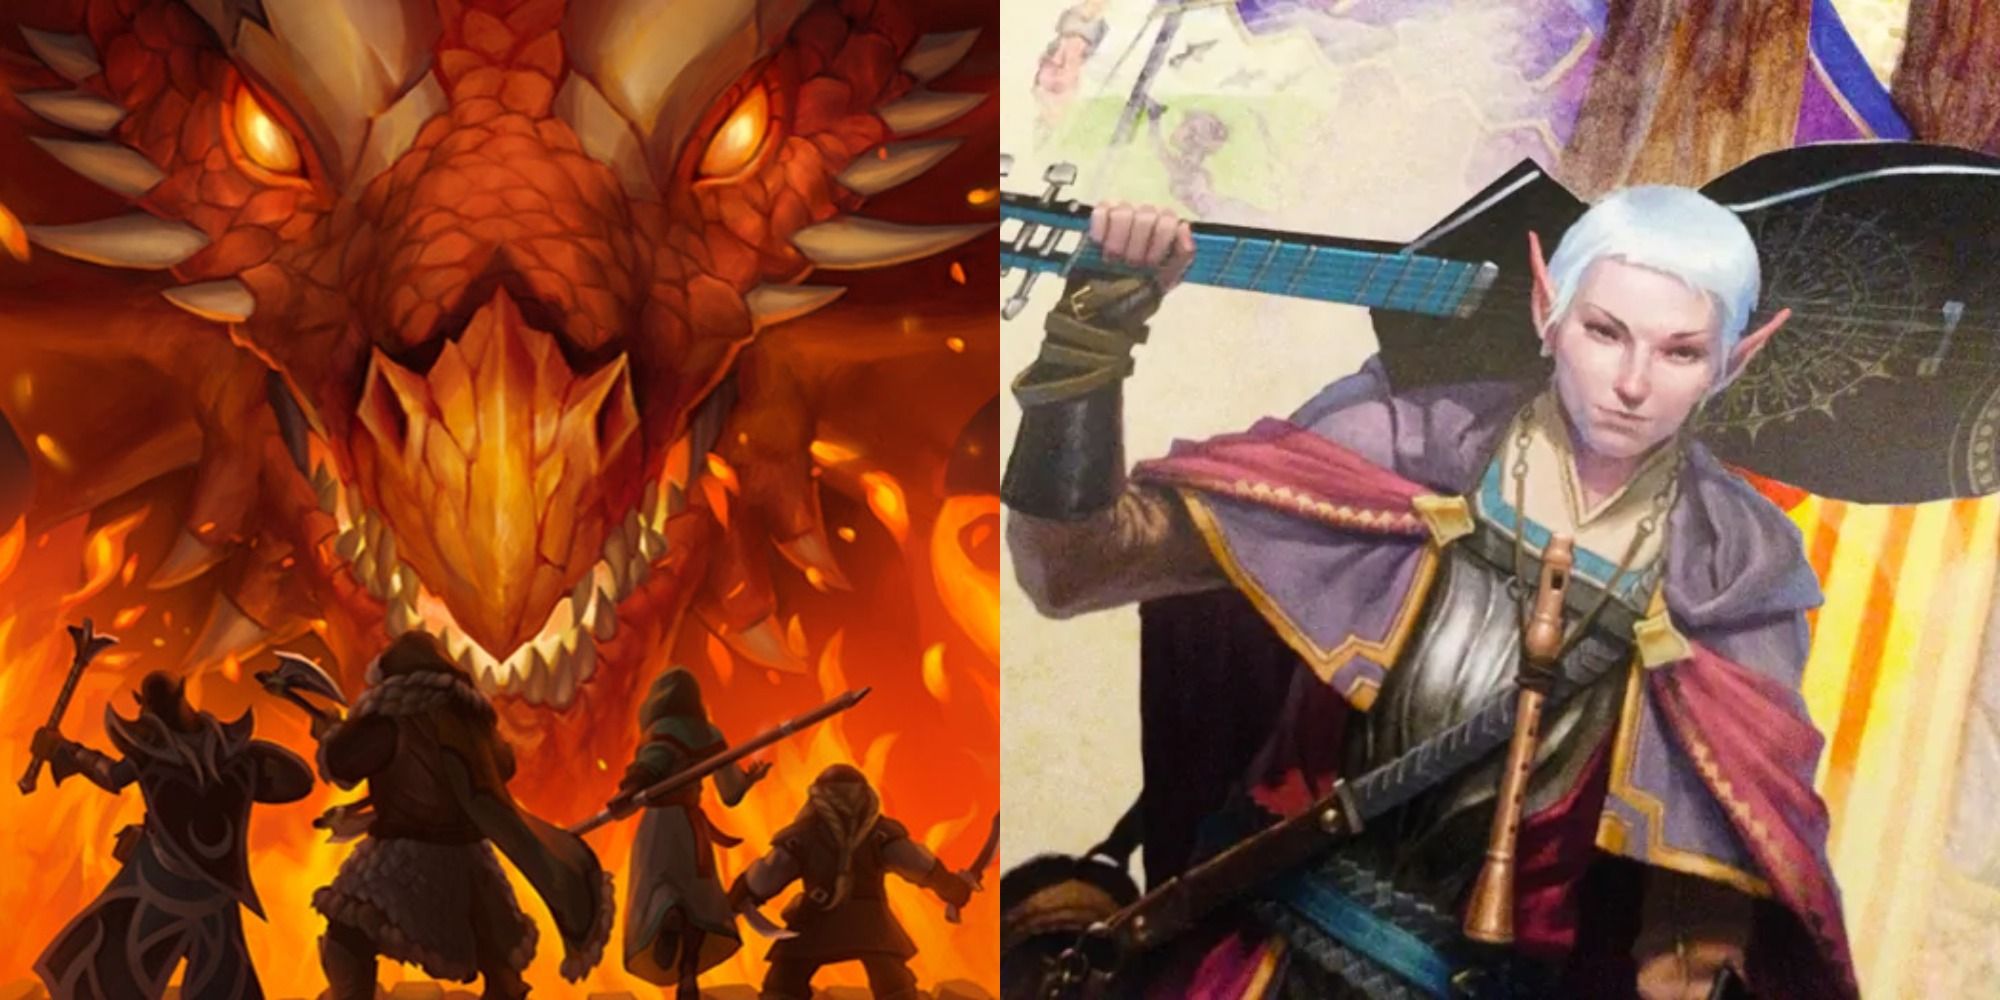 Split image showing a dragon and a bard from Dungeons and Dragons